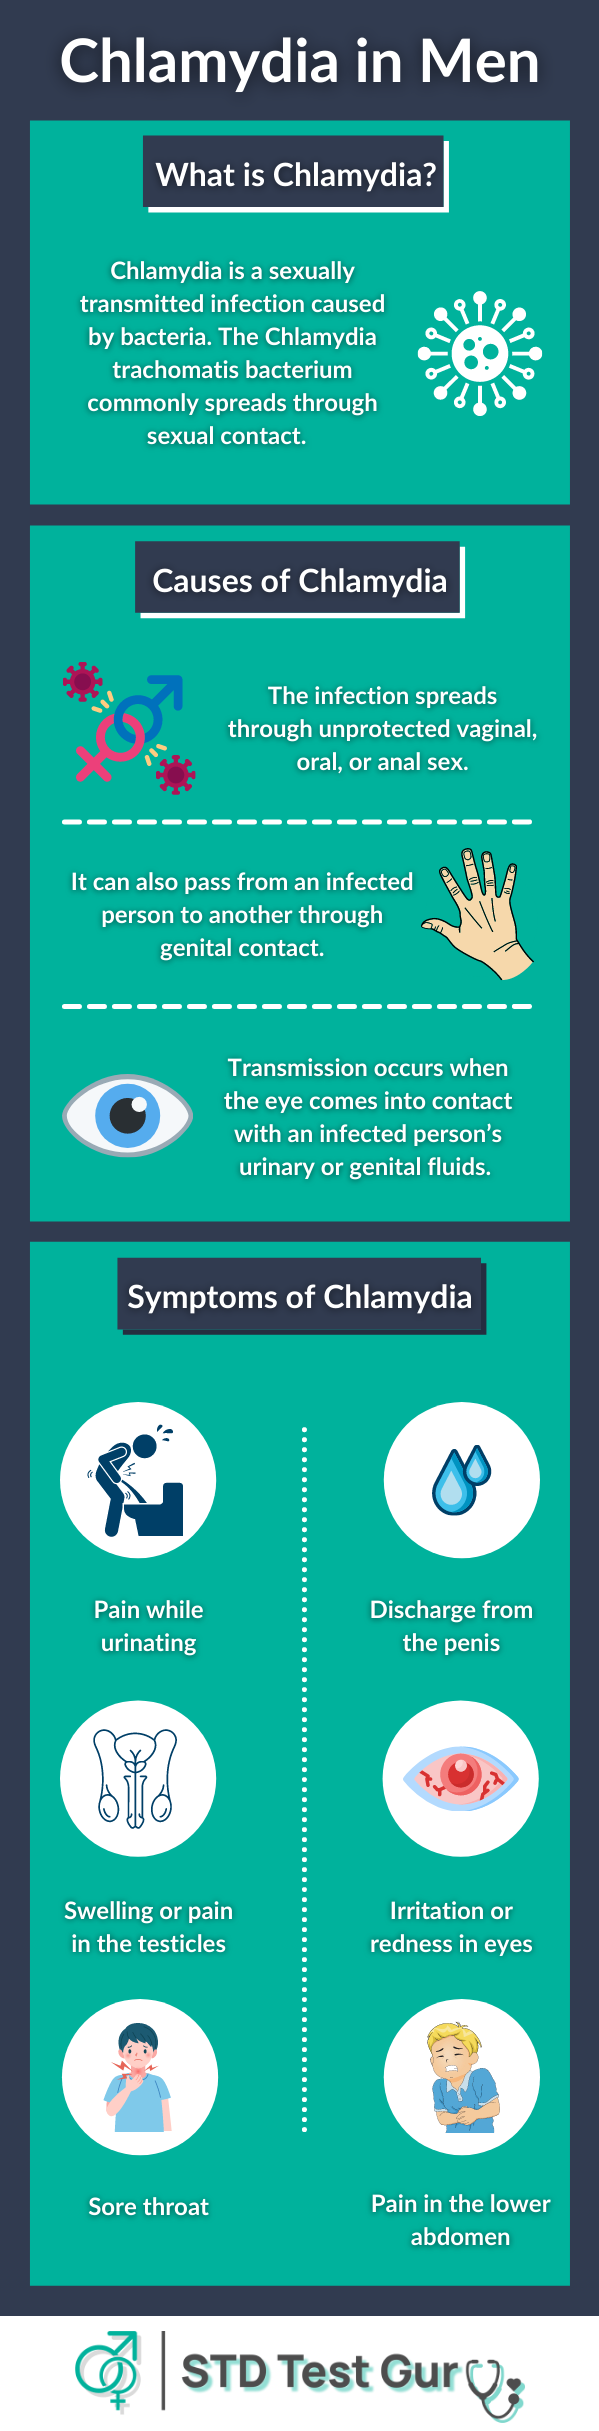 Chlamydia in Men: Causes and Symptoms